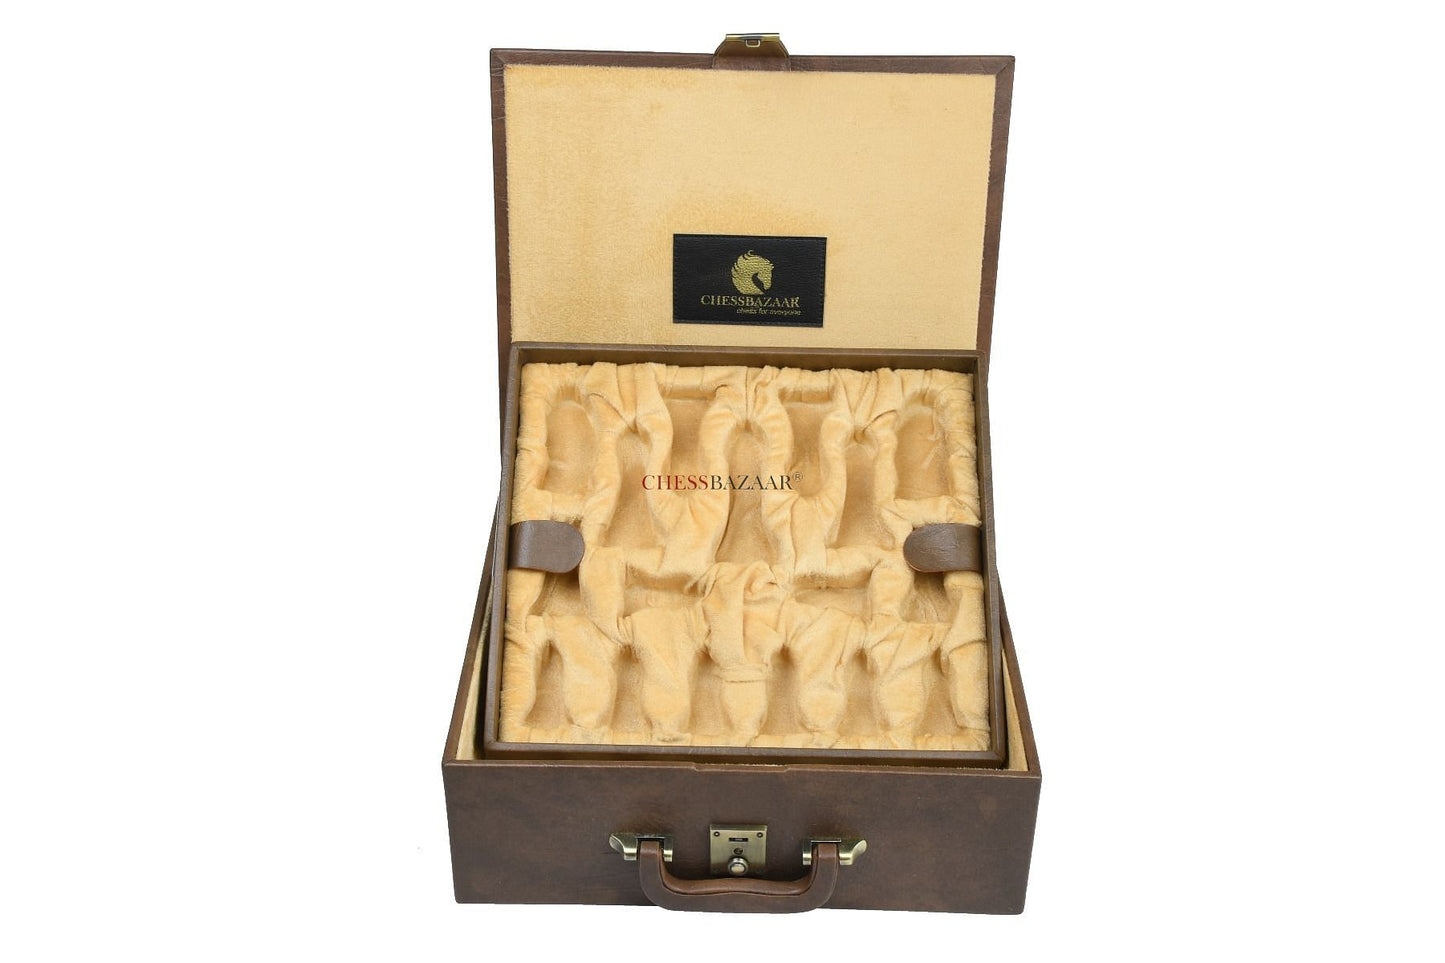 Dedicated chess storage box in brown color